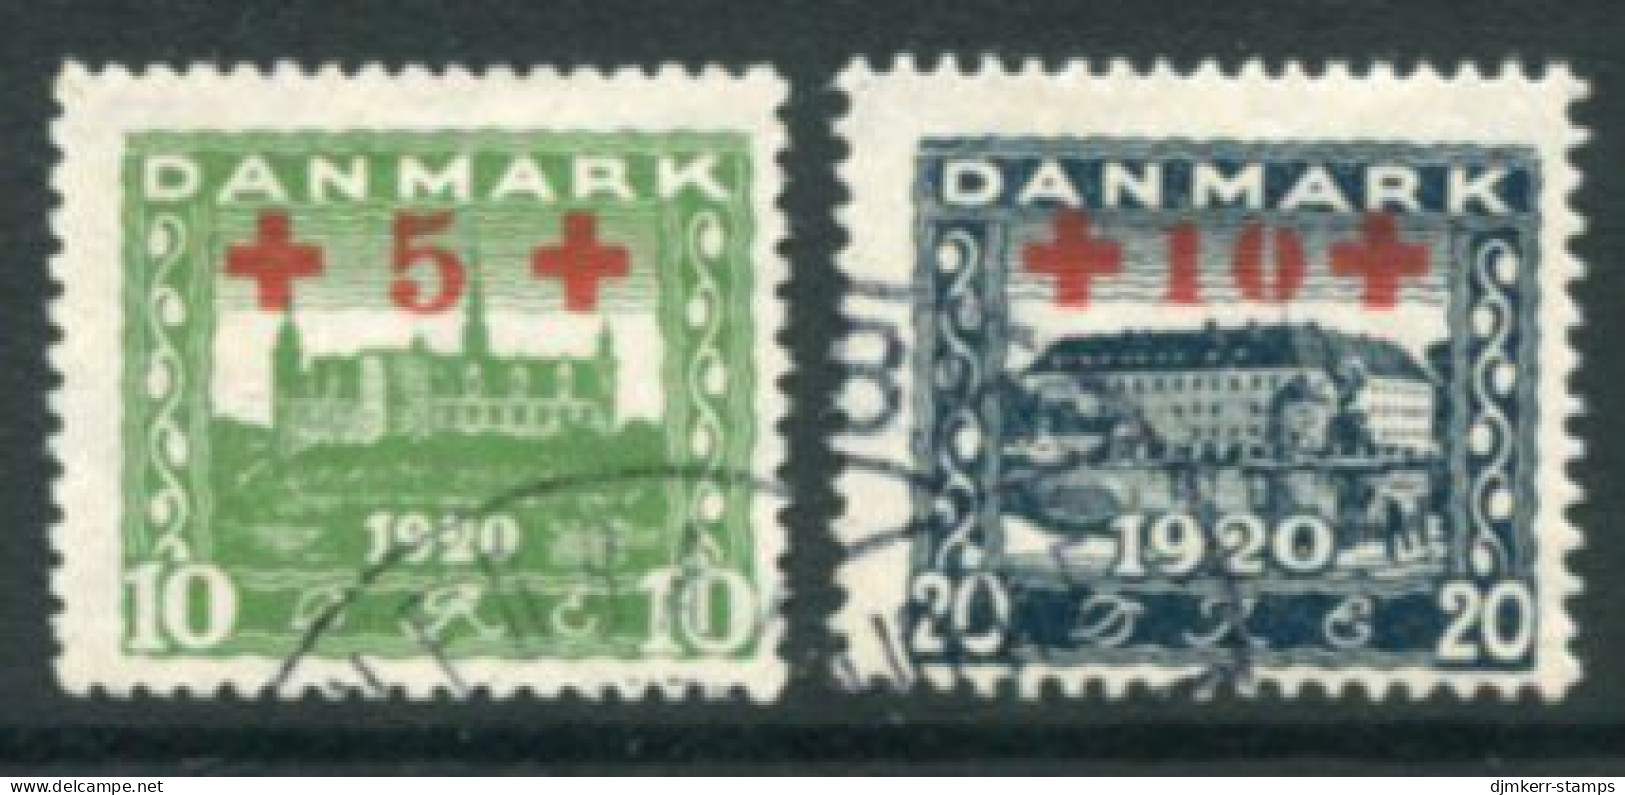 DENMARK 1921 Red Cross Surcharge Set, Used. Michel 116-17 - Usado